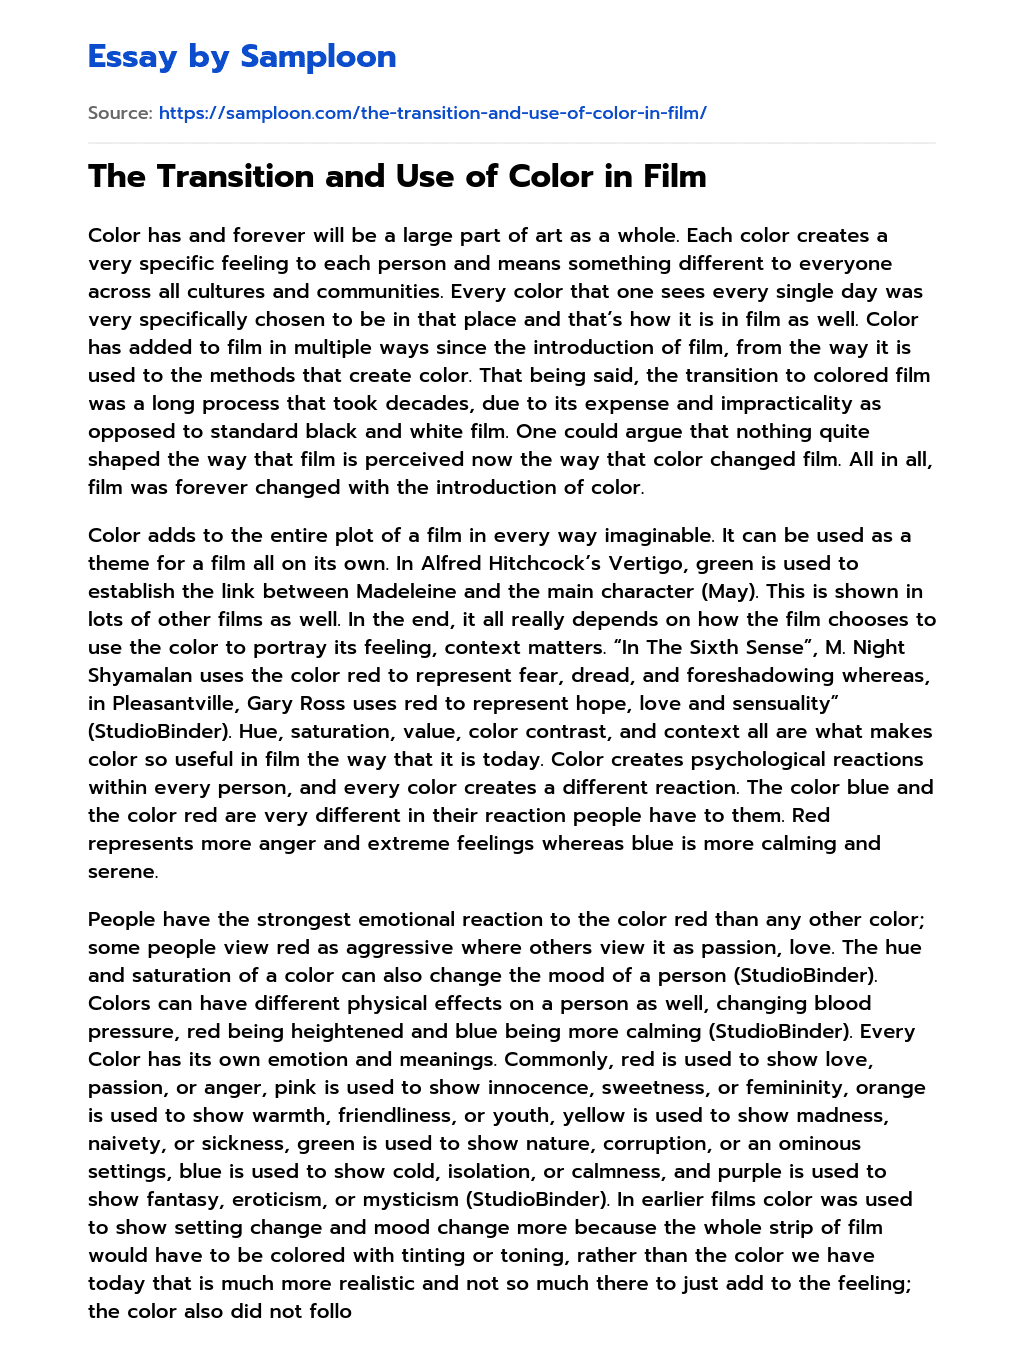 The Transition and Use of Color in Film  essay